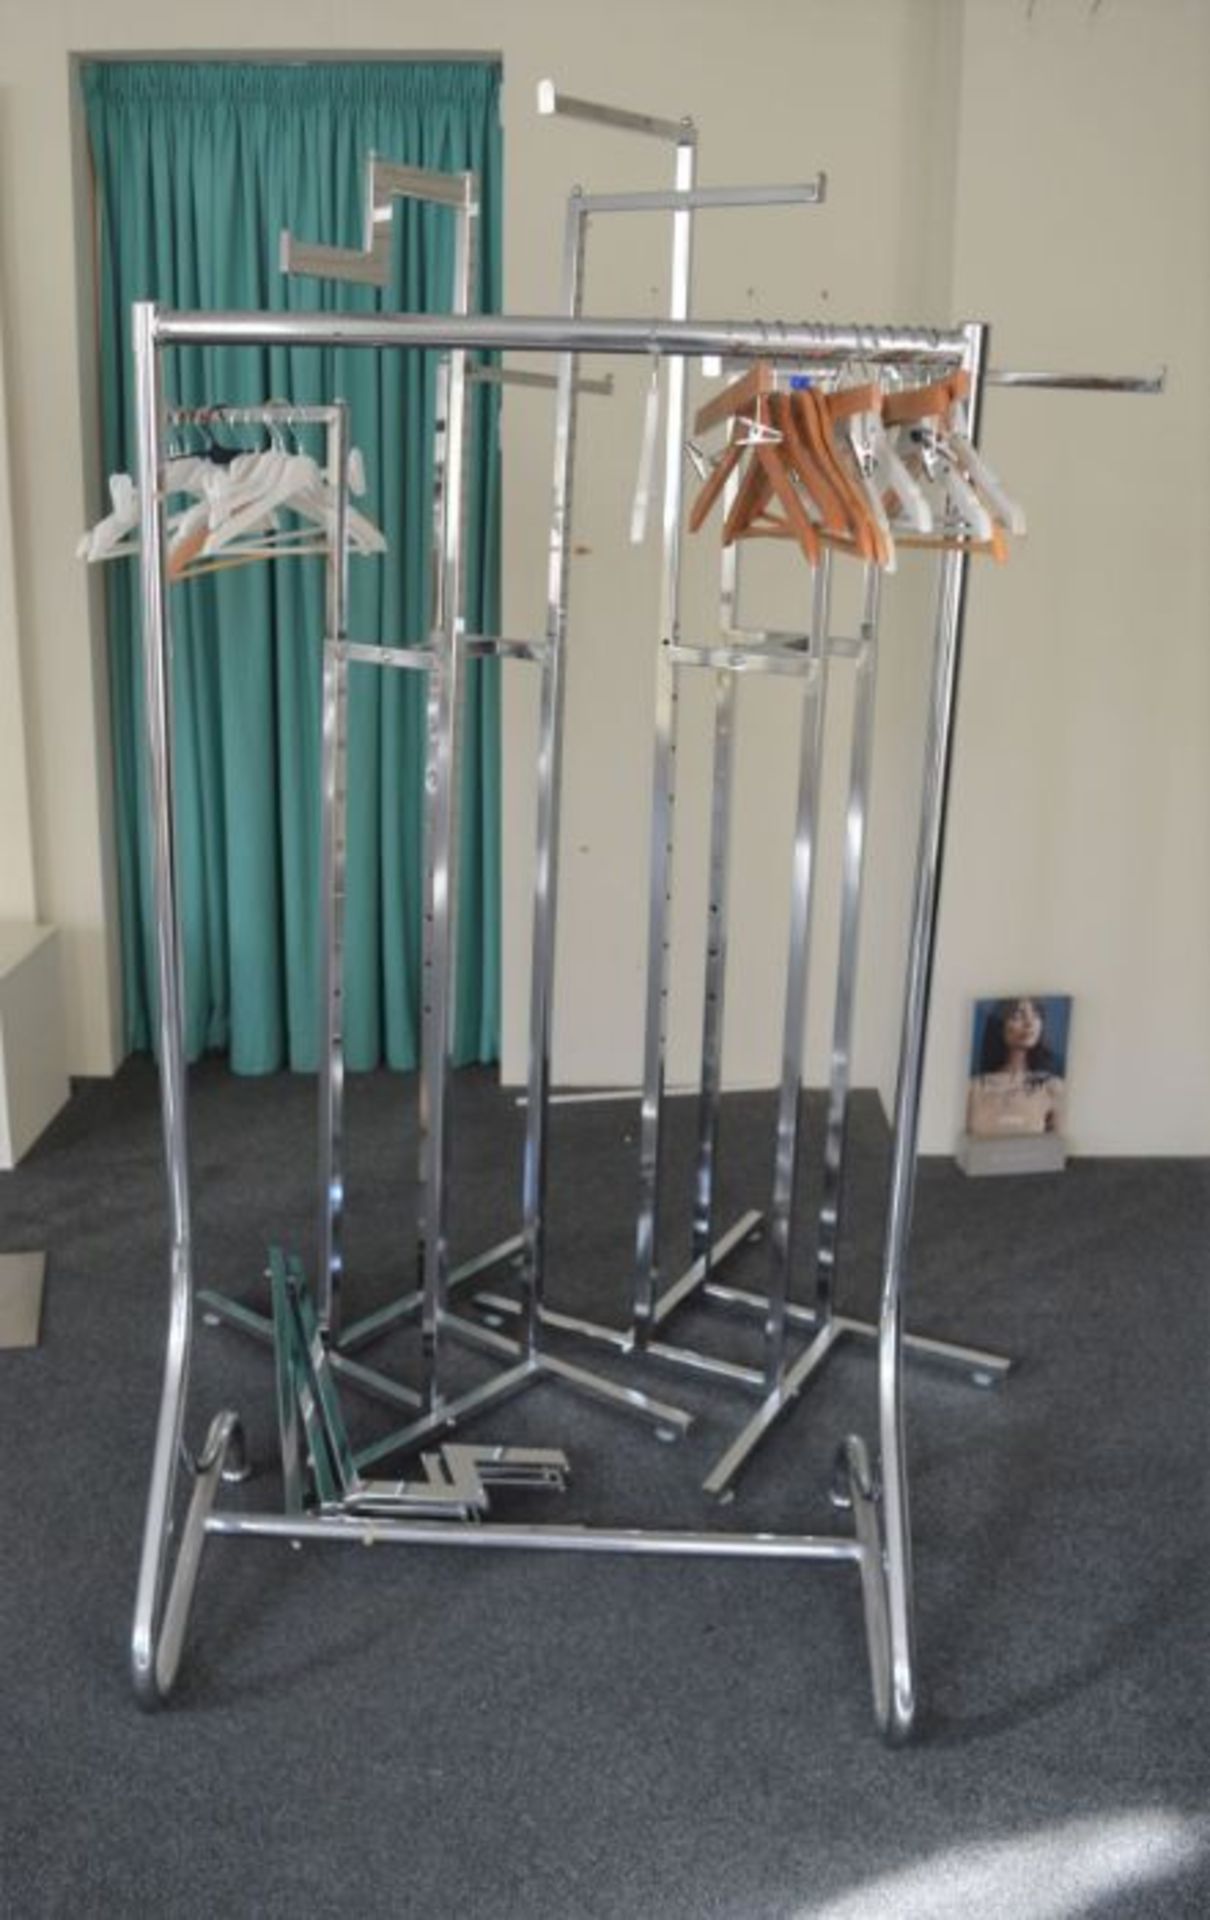 *1 x clothes rail & 2 adjustable rails with branches